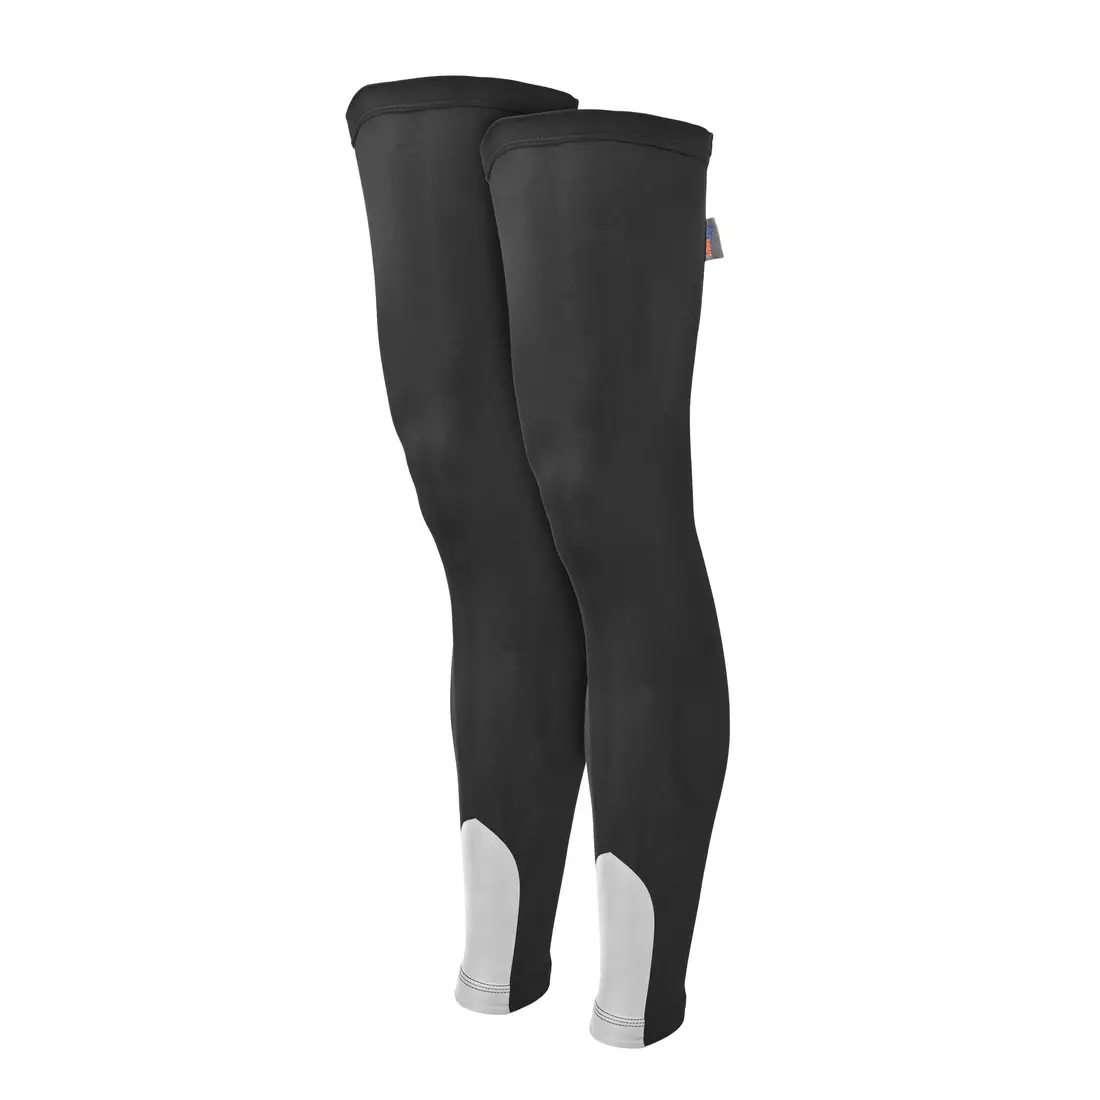 MikeSPORT - SUPERROUBAIX 2014W insulated cycling trousers